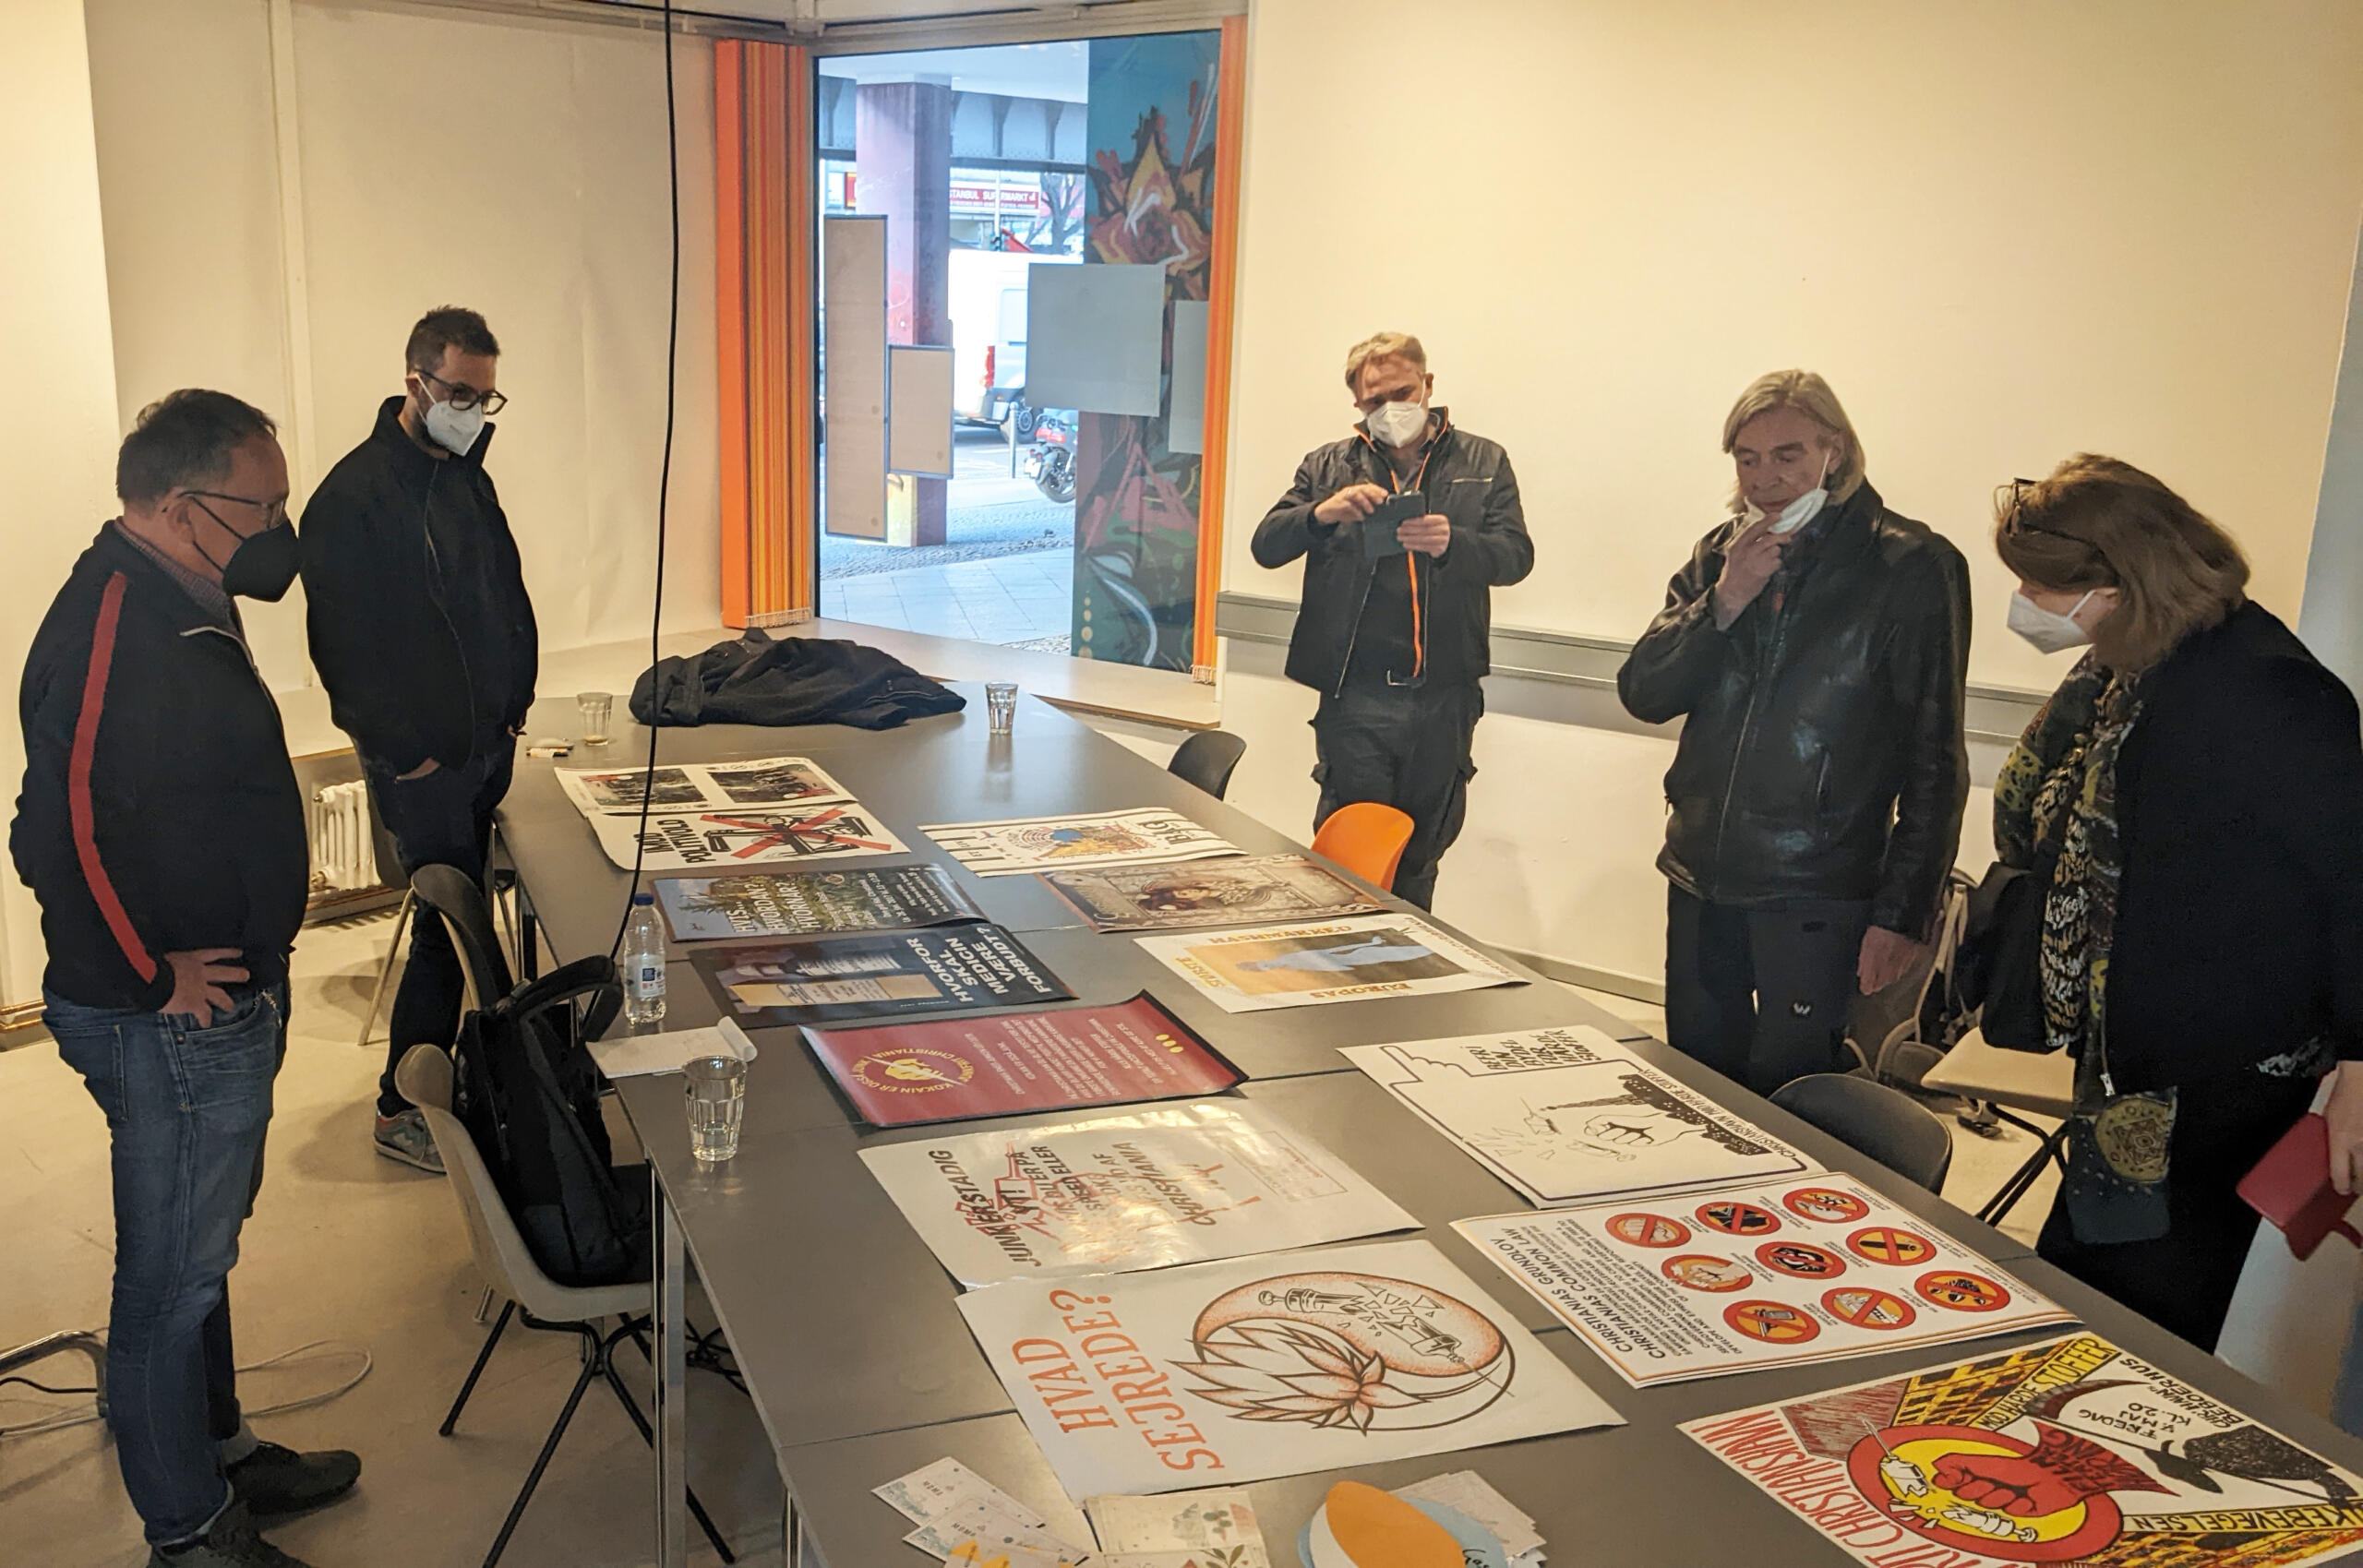 Members of the team examining posters on a table which were donated to the project